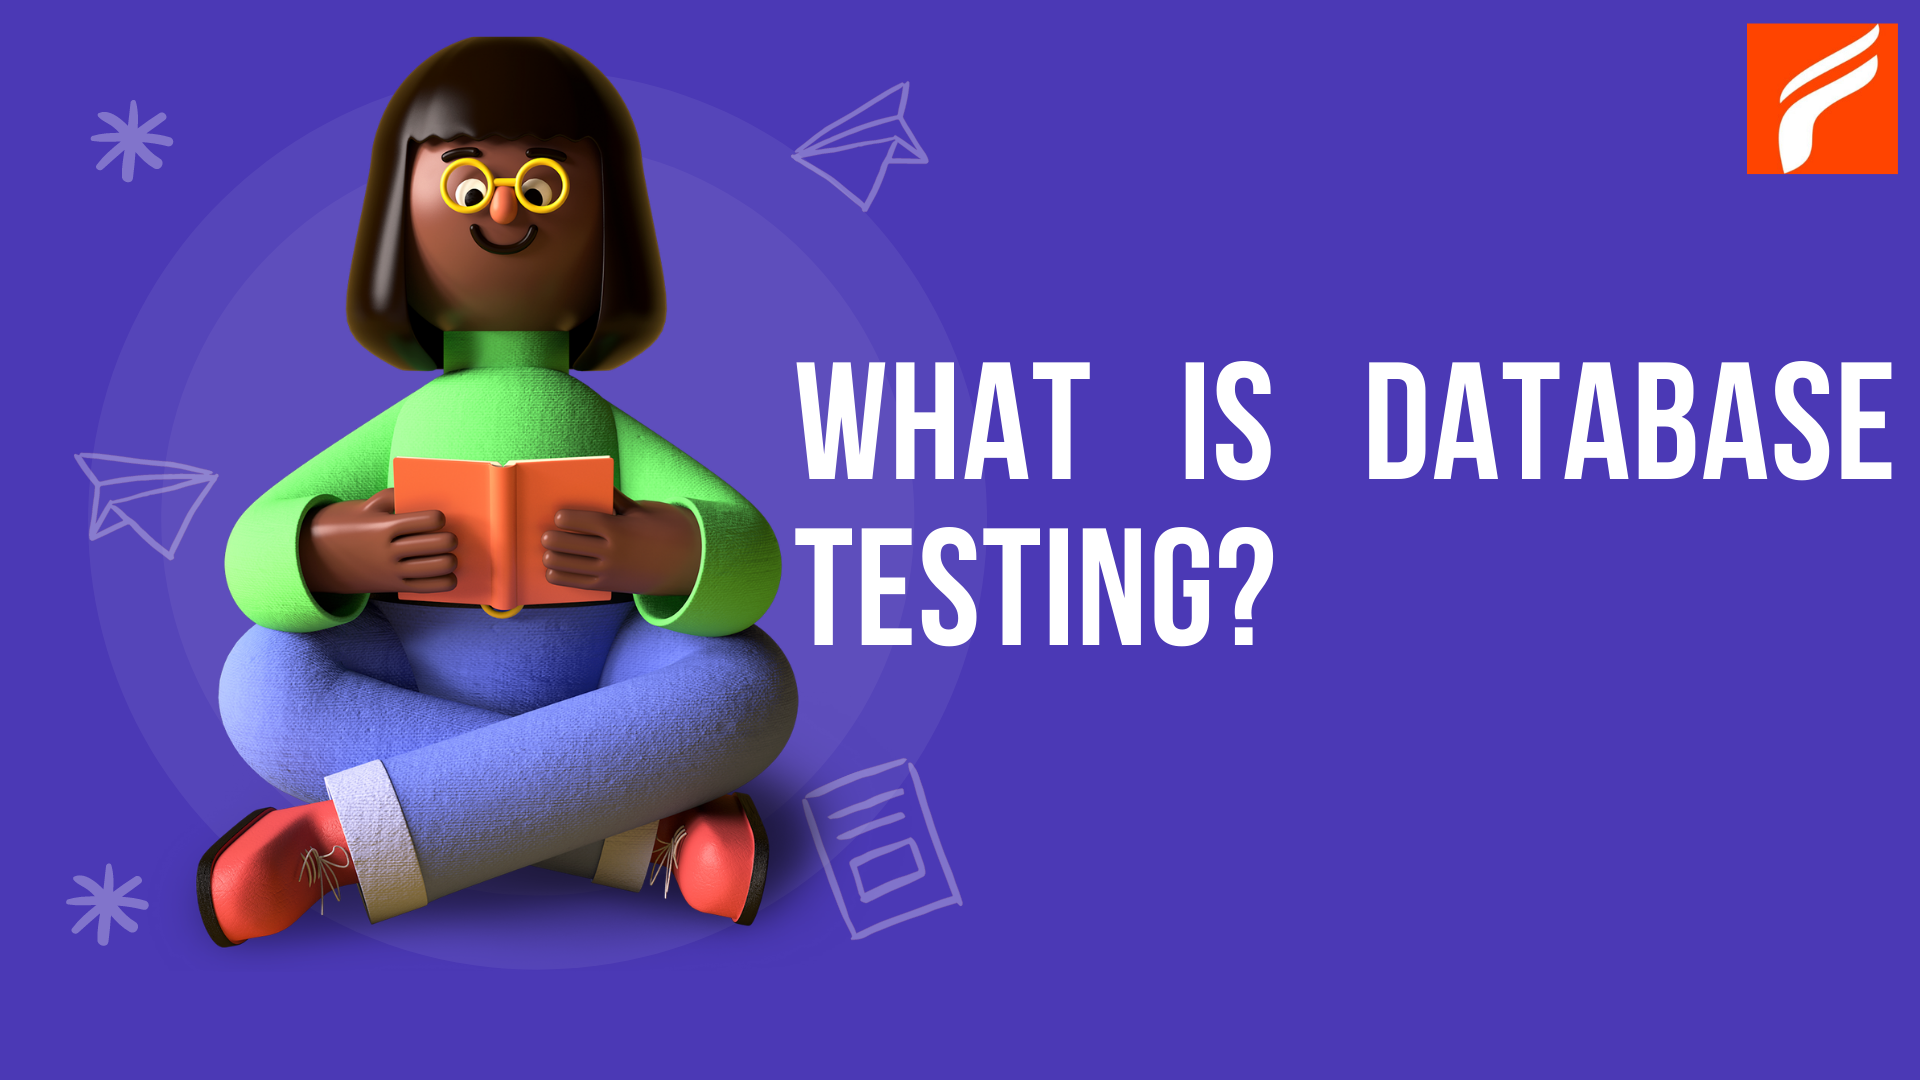 Article about What is Database Testing